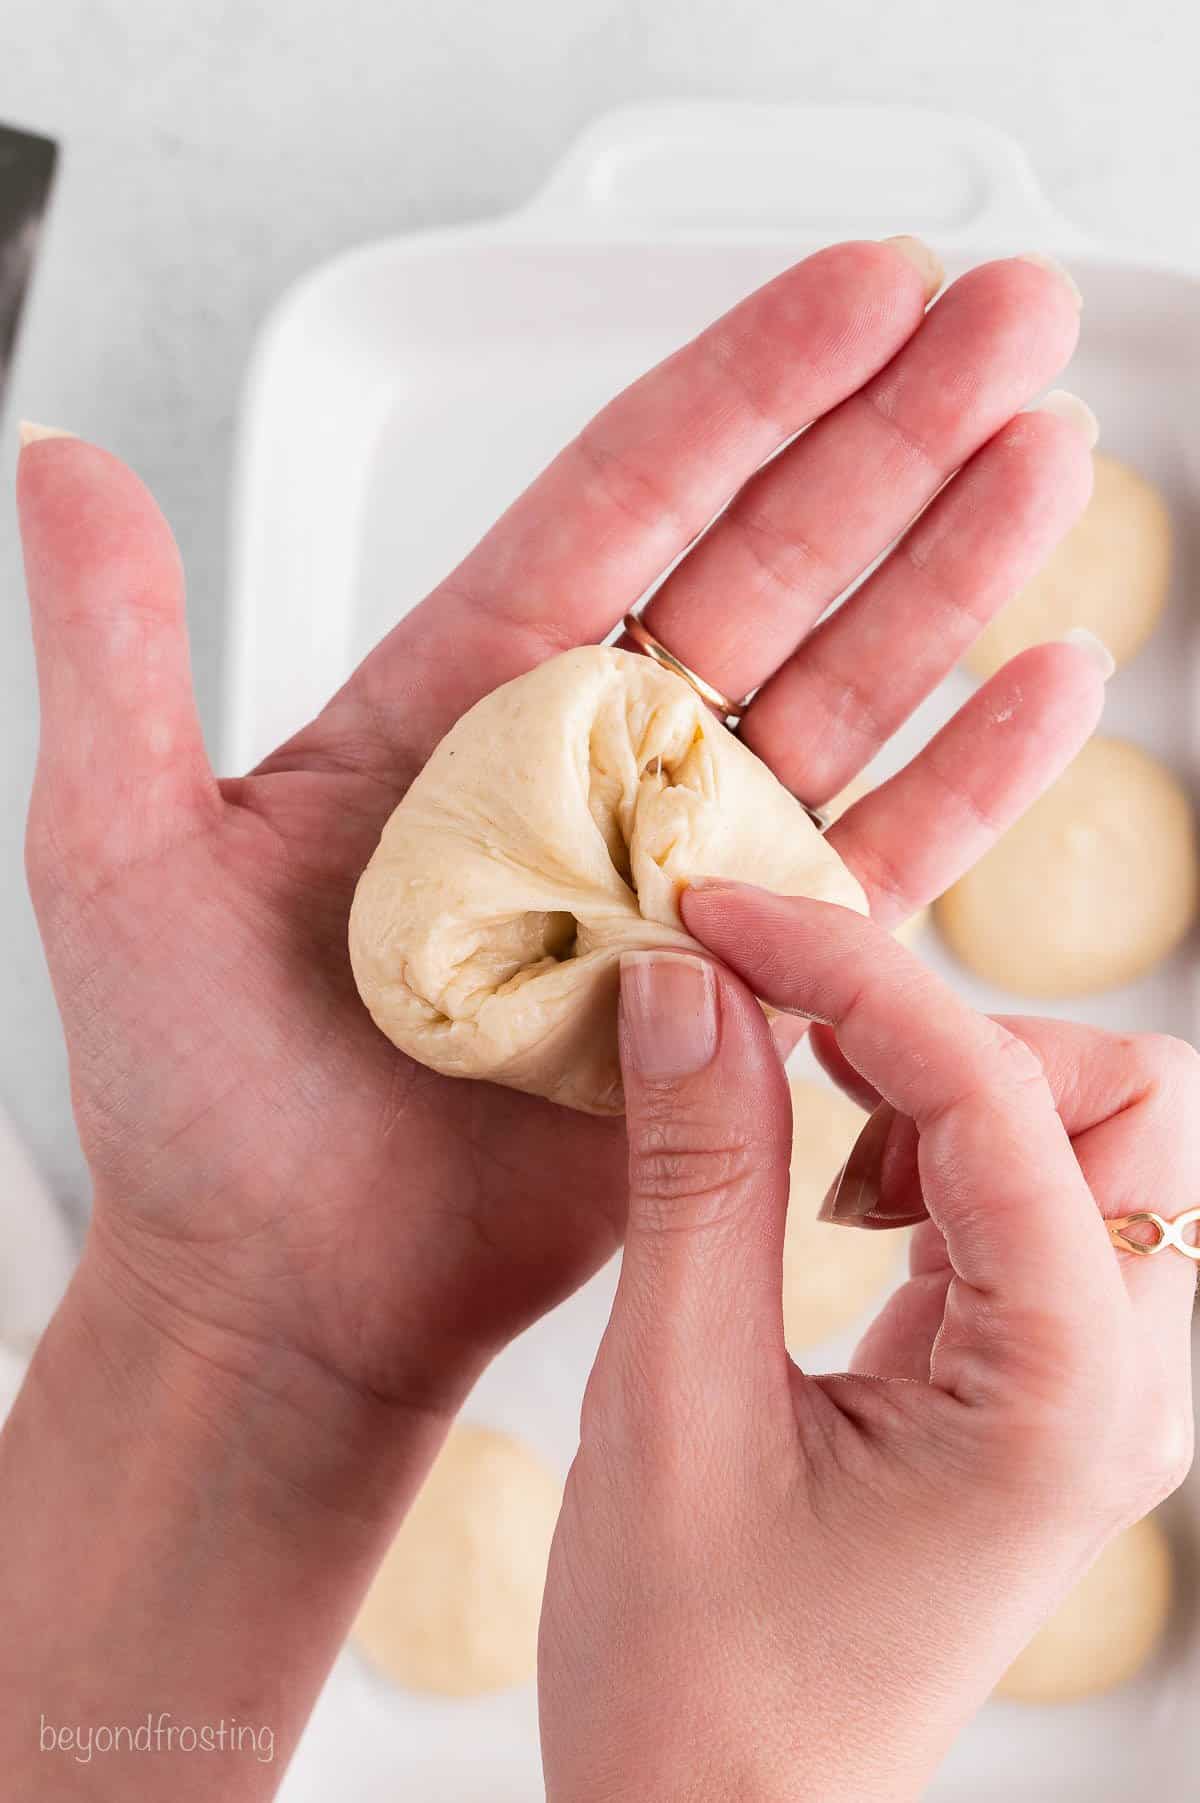 A hand forming a ball of dough